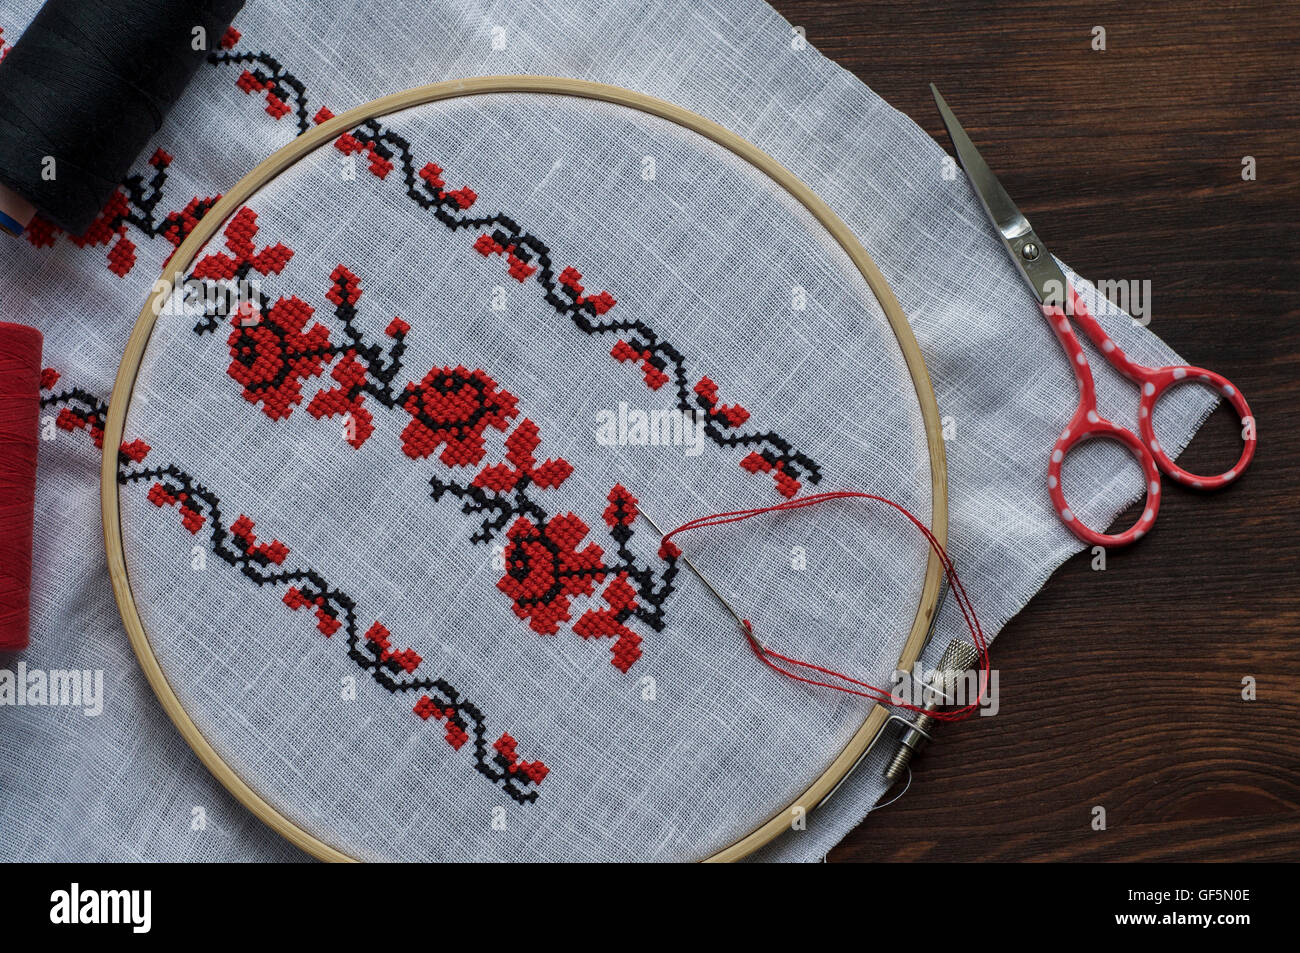 Hand embroidery cross-stitch flower ornament on a white fabric in the wooden embroidery hoop, top view Stock Photo